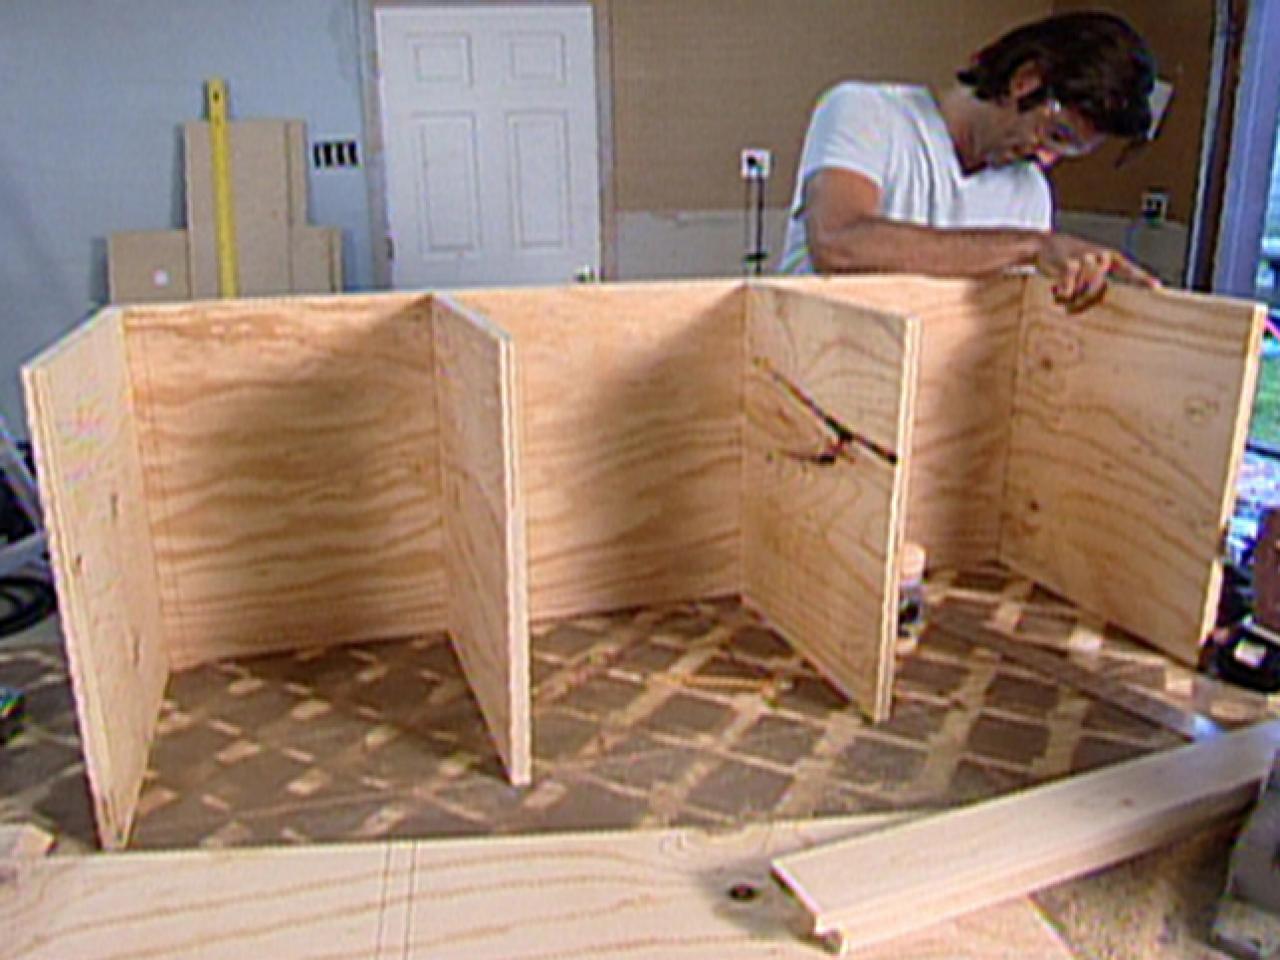 How to Build a Rolling Storage Bench | HGTV